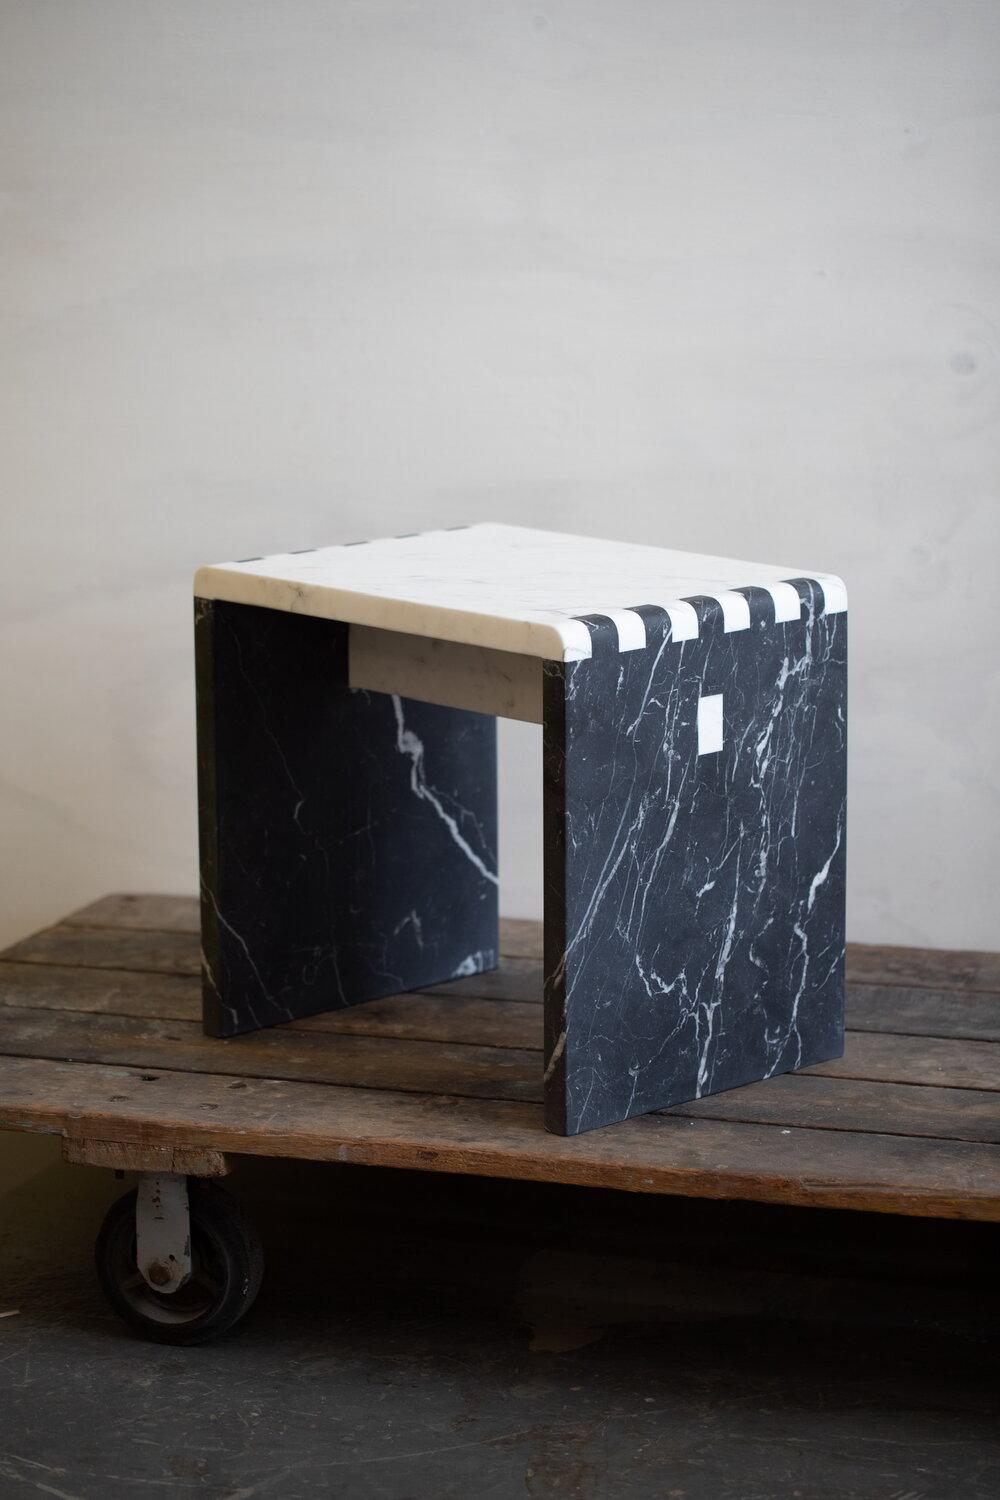 Marble Jointed stool 003 by Chris Miano

Calacatta Gold & Nero Marquina Marble
17 × 18 1/4 × 13 3/4 in
43.2 × 46.4 × 34.9 cm

Inspired by traditional Japanese wood joinery, this minimalist stool / side table is a material study of stone. Shown in